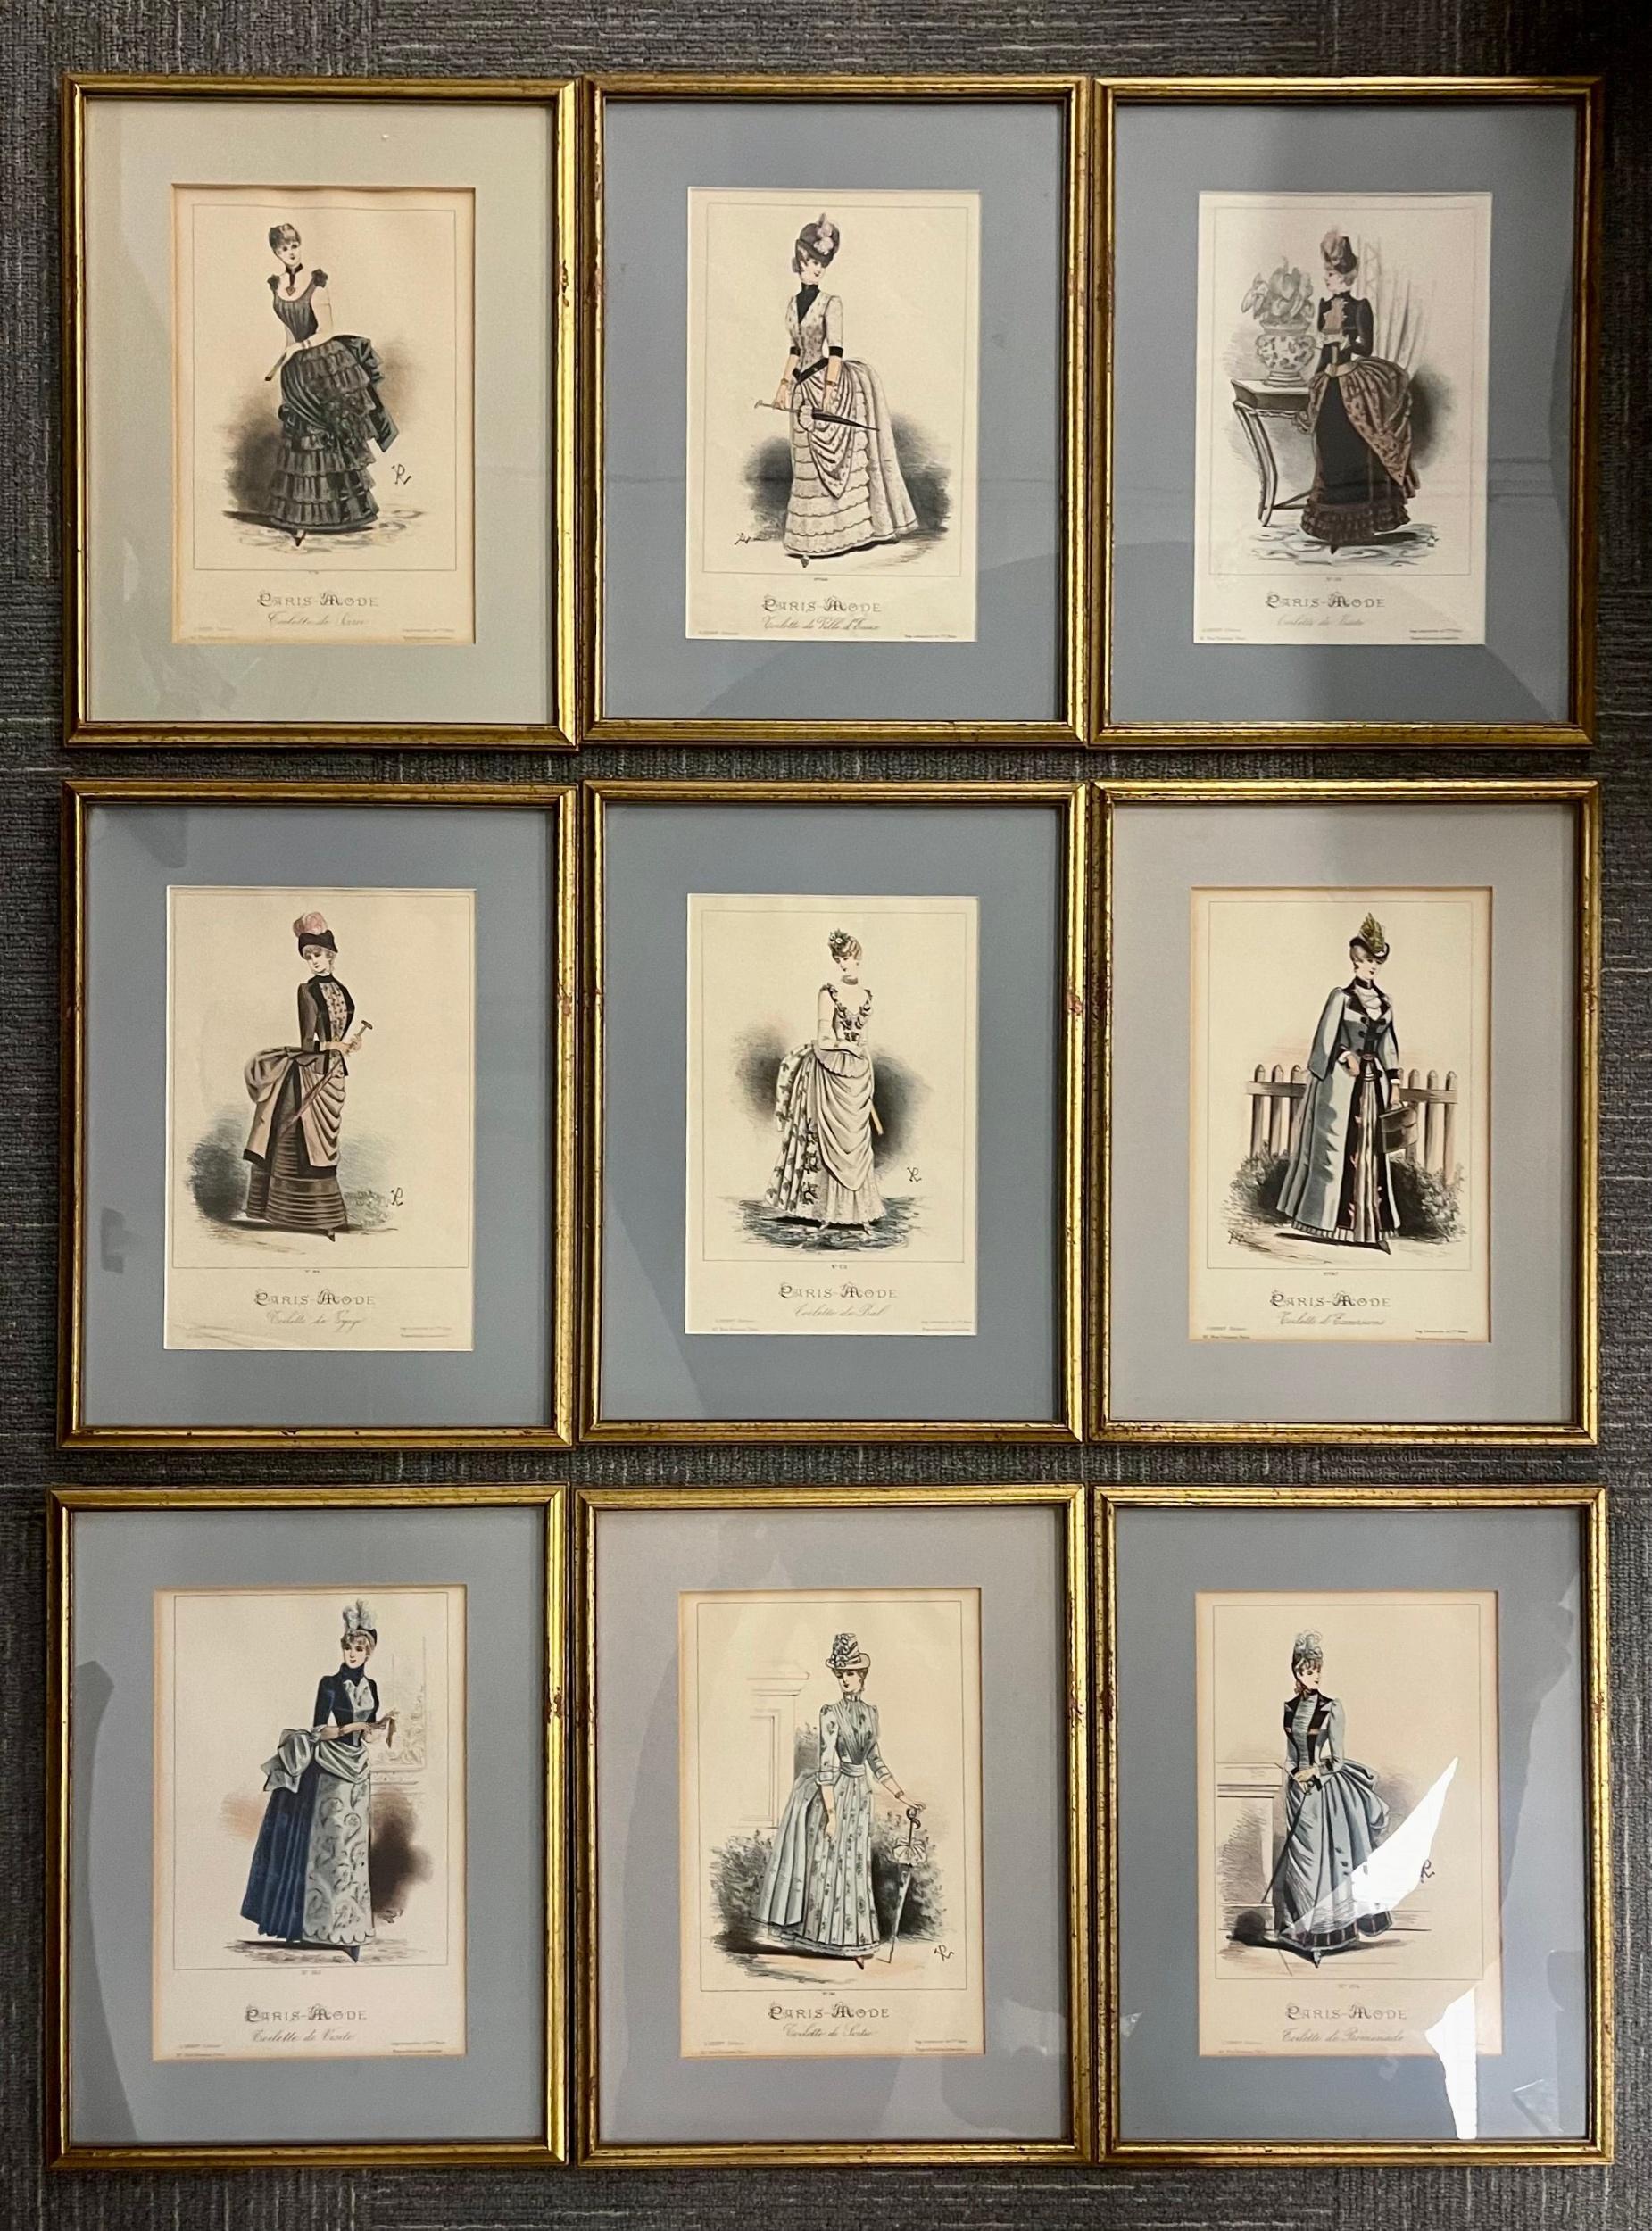 A set of nine lemercier and cie plates each in a gilt frame, matted. Previous sold as a set of twelve in Christies NYC. See below.

Provenance Christies NYC Sale 1495 April 05, 2005 Lot 214
Lemercier & Cie [Publishers]
Paris-mode: twelve